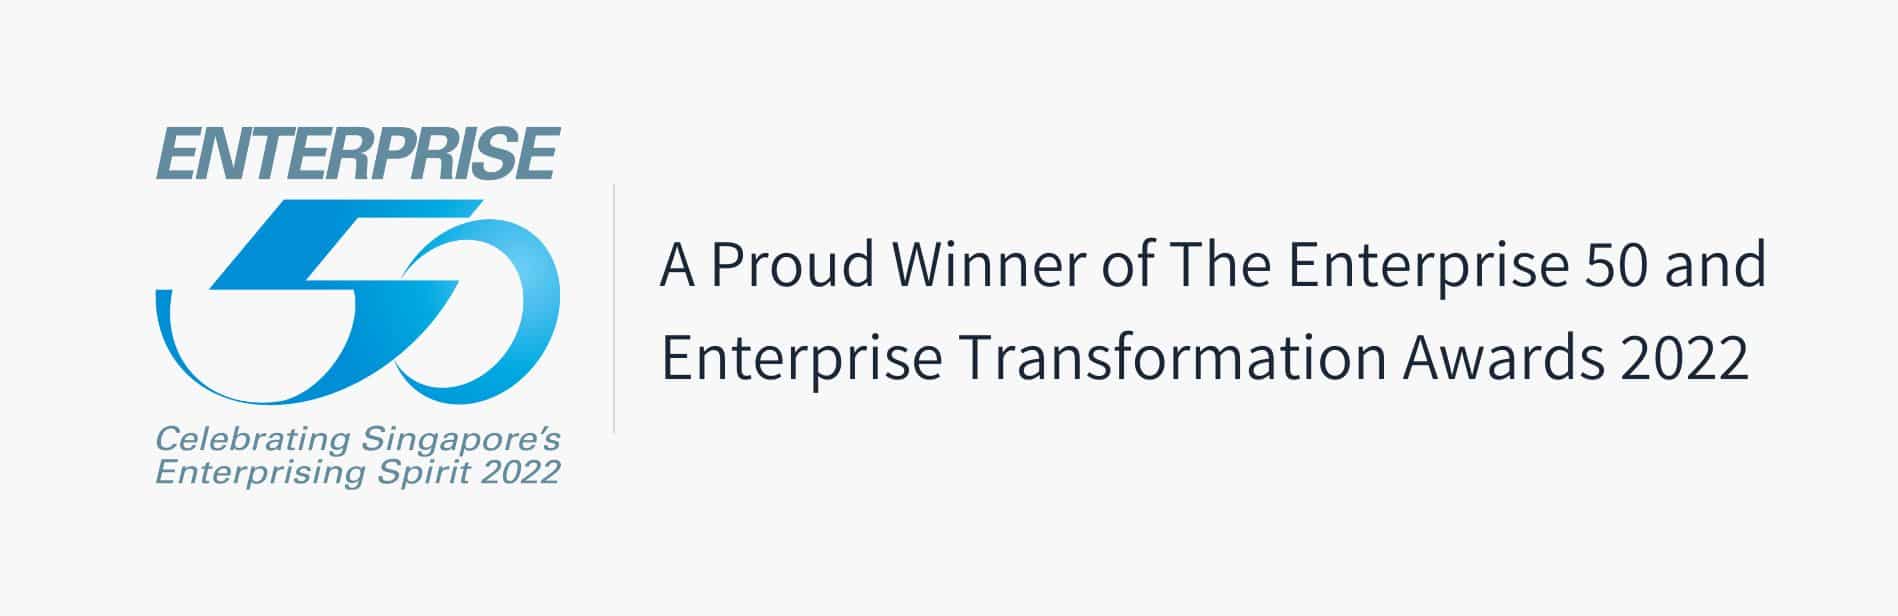 Minmed - A Proud Winner of The Enterprise 50 and Enterprise Transformation Awards 2022